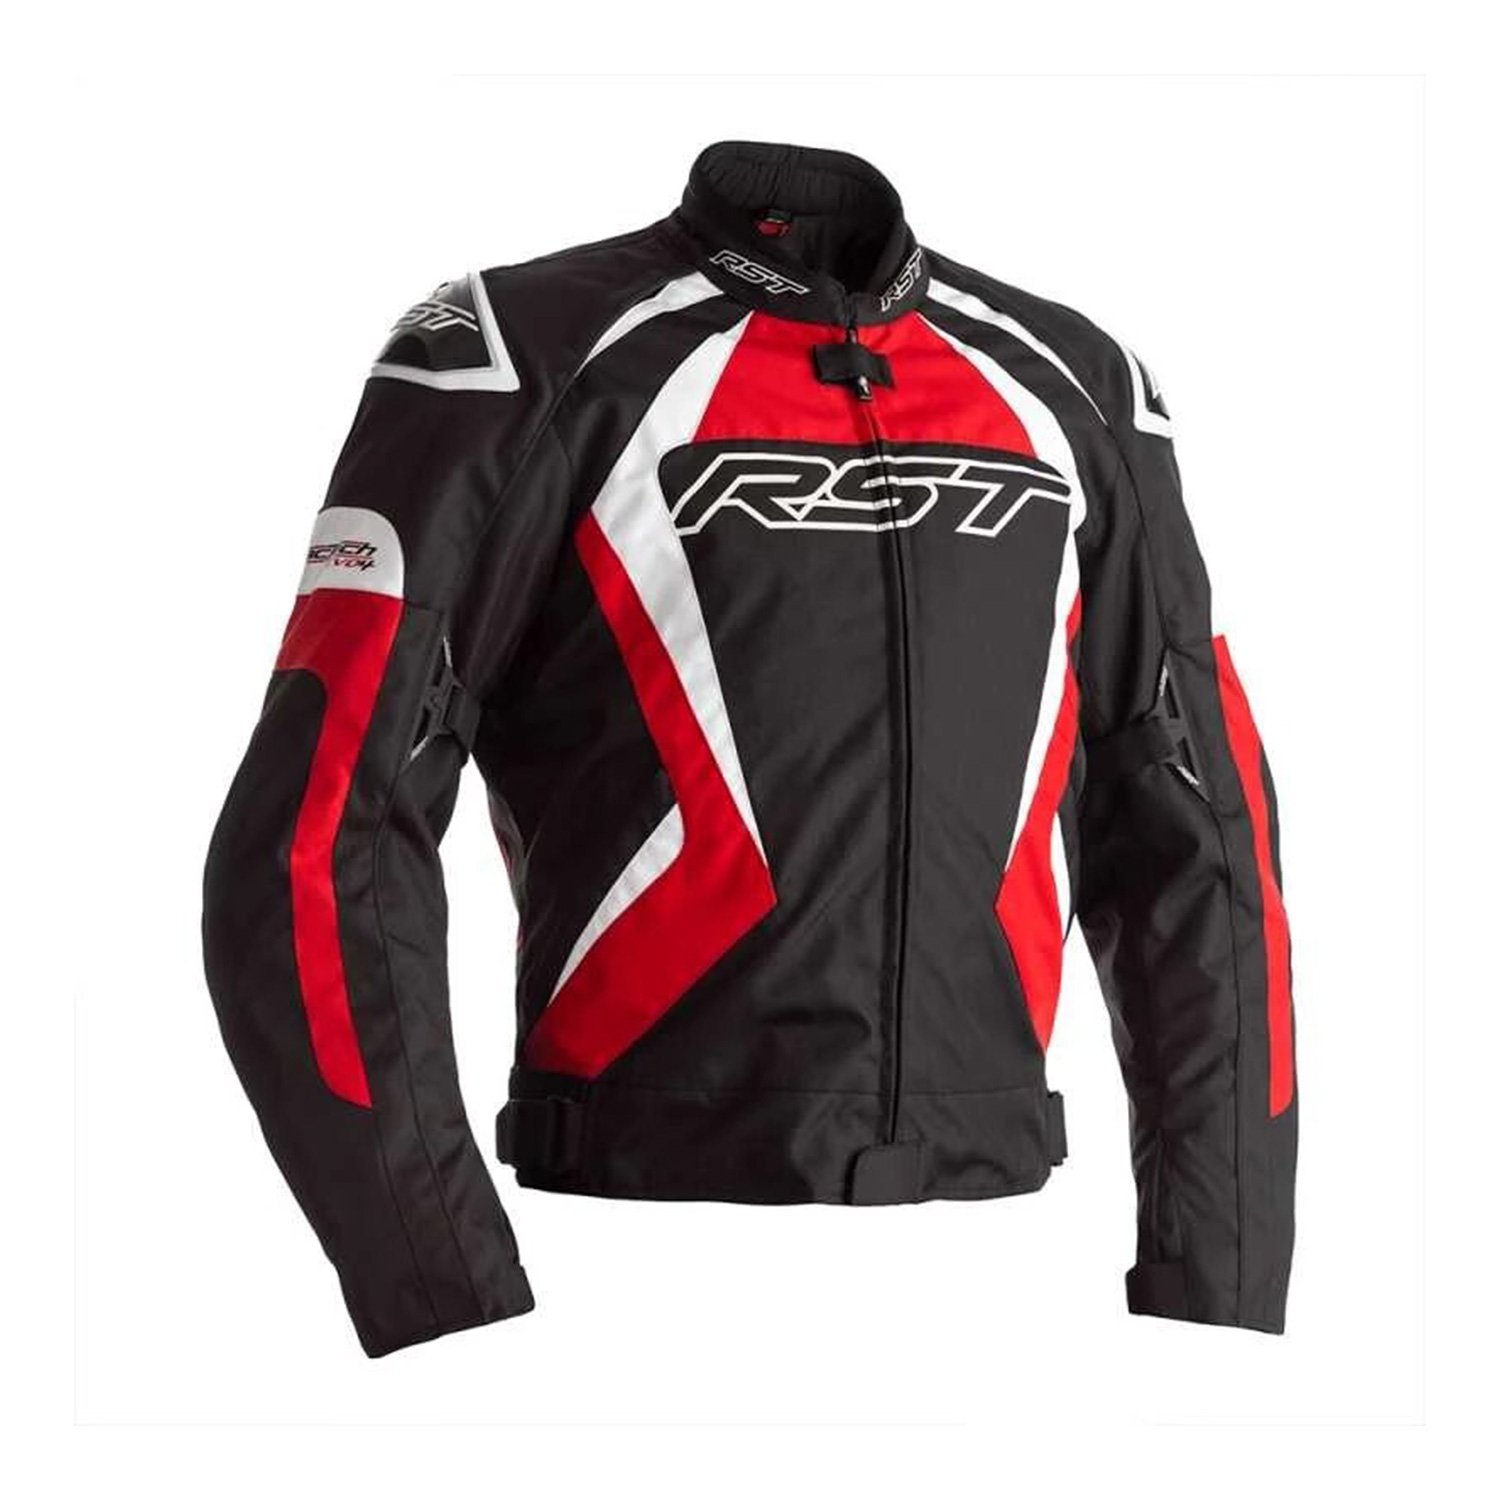 Image of RST Tractech Evo 4 CE Jacket Black Red White Size 40 ID 5056136245803